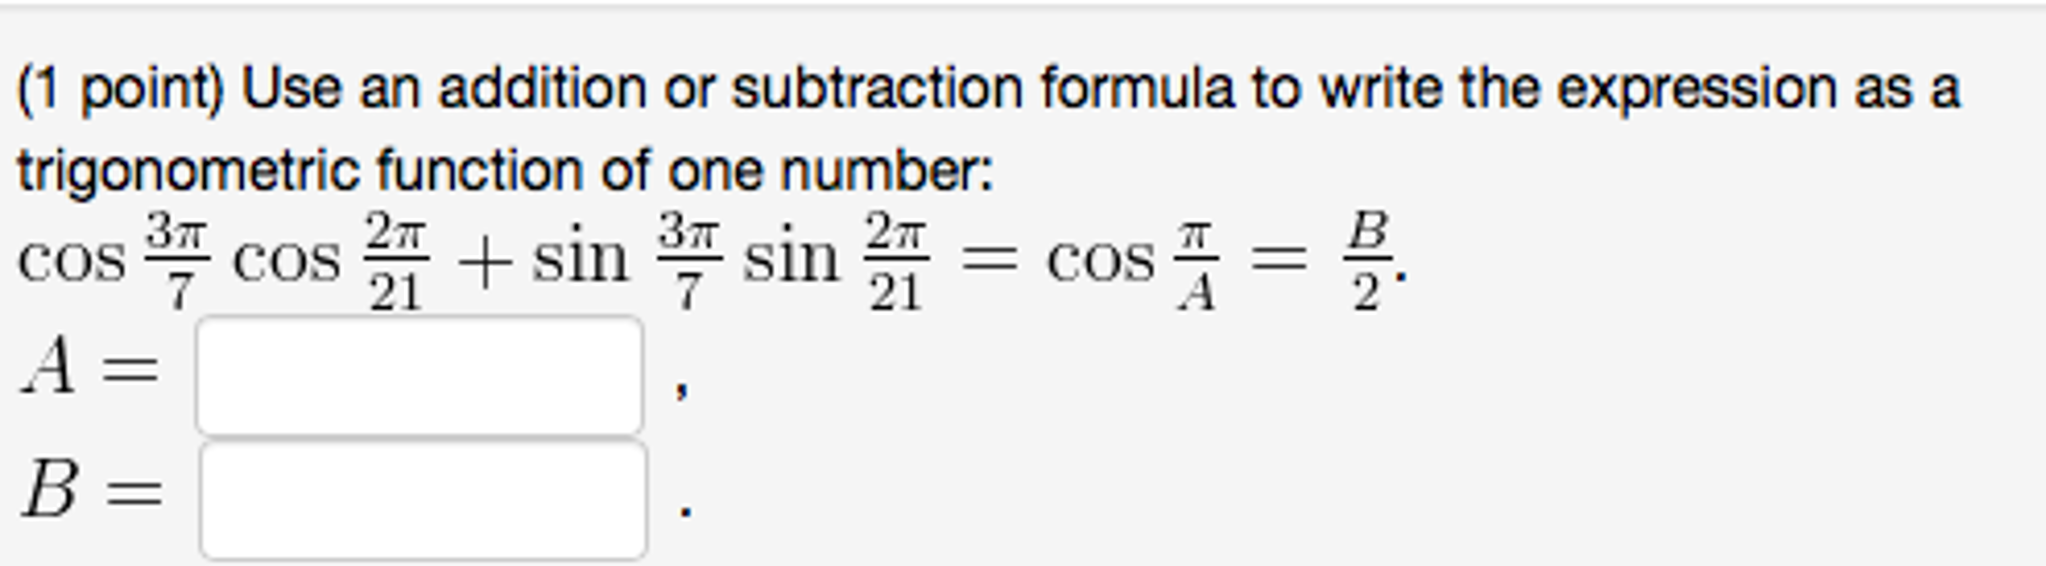 solved-use-an-addition-or-subtraction-formula-to-write-the-chegg